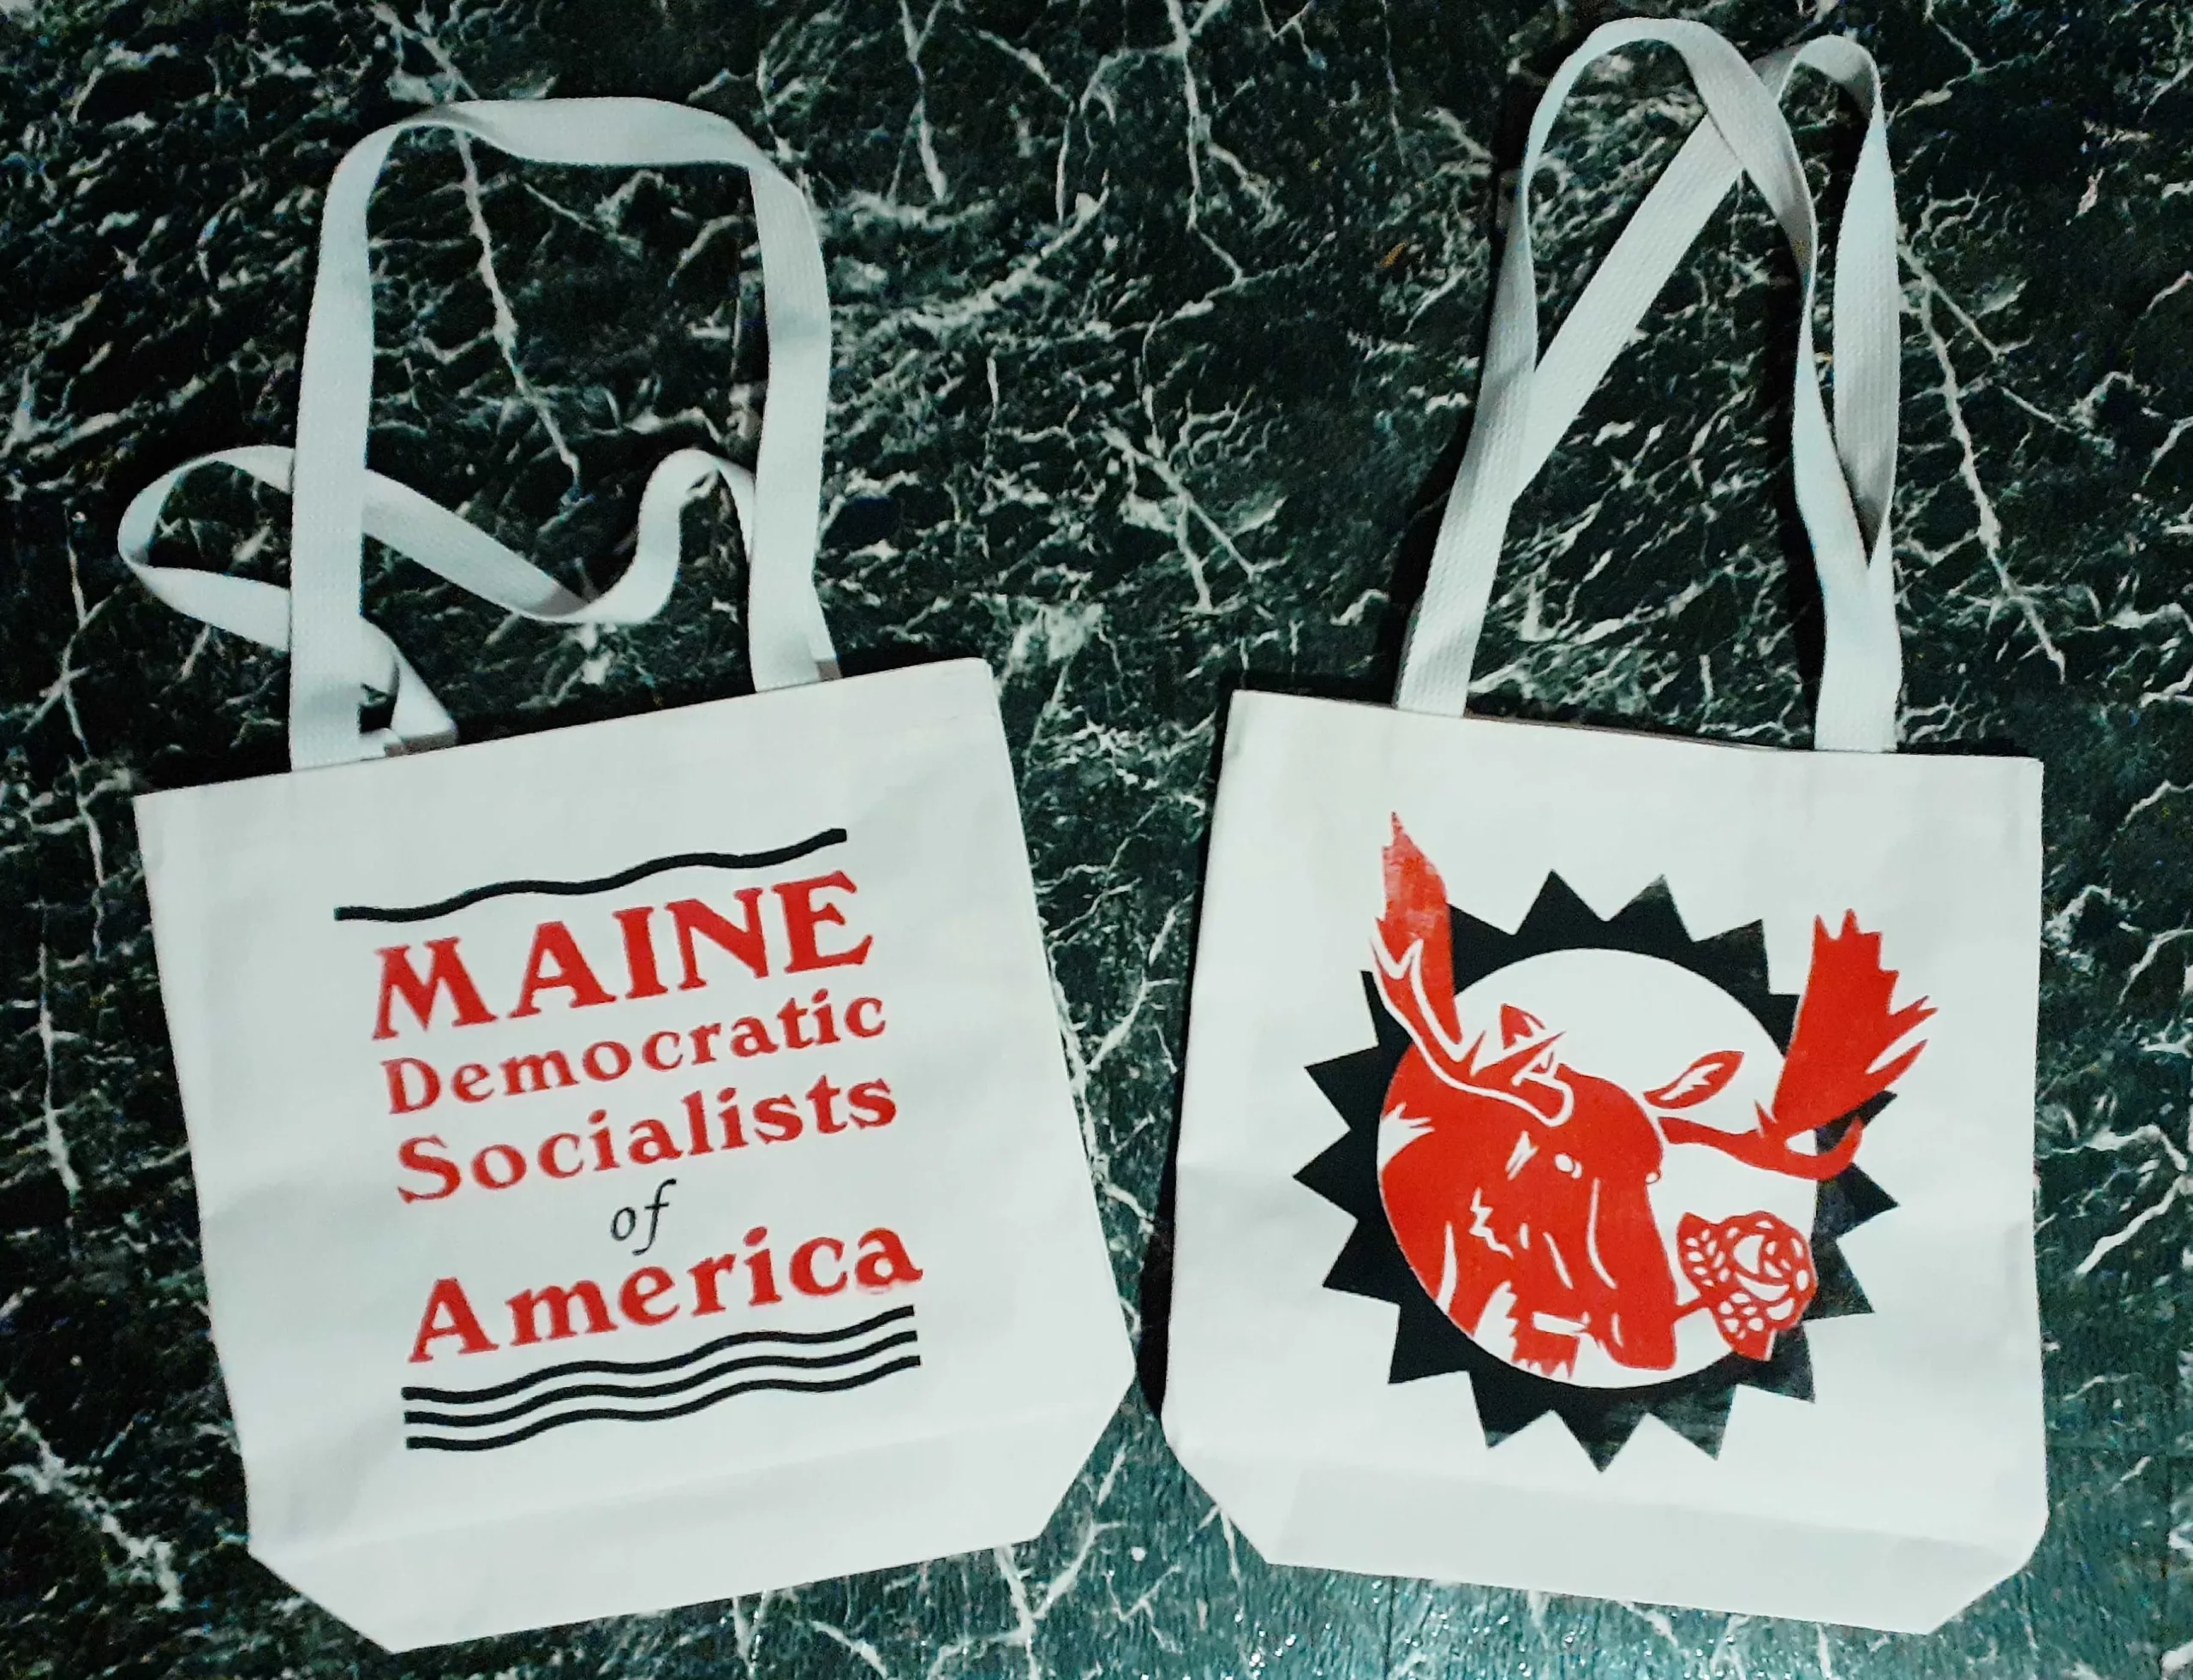 Exclusive Maine DSA Merch screen printed by a local comrade on canvas totes made in New Hampshire. A moose holding a rose in its mouth on one side and Maine Democratic Socialists of America on the other with wavy lines above and below the text.